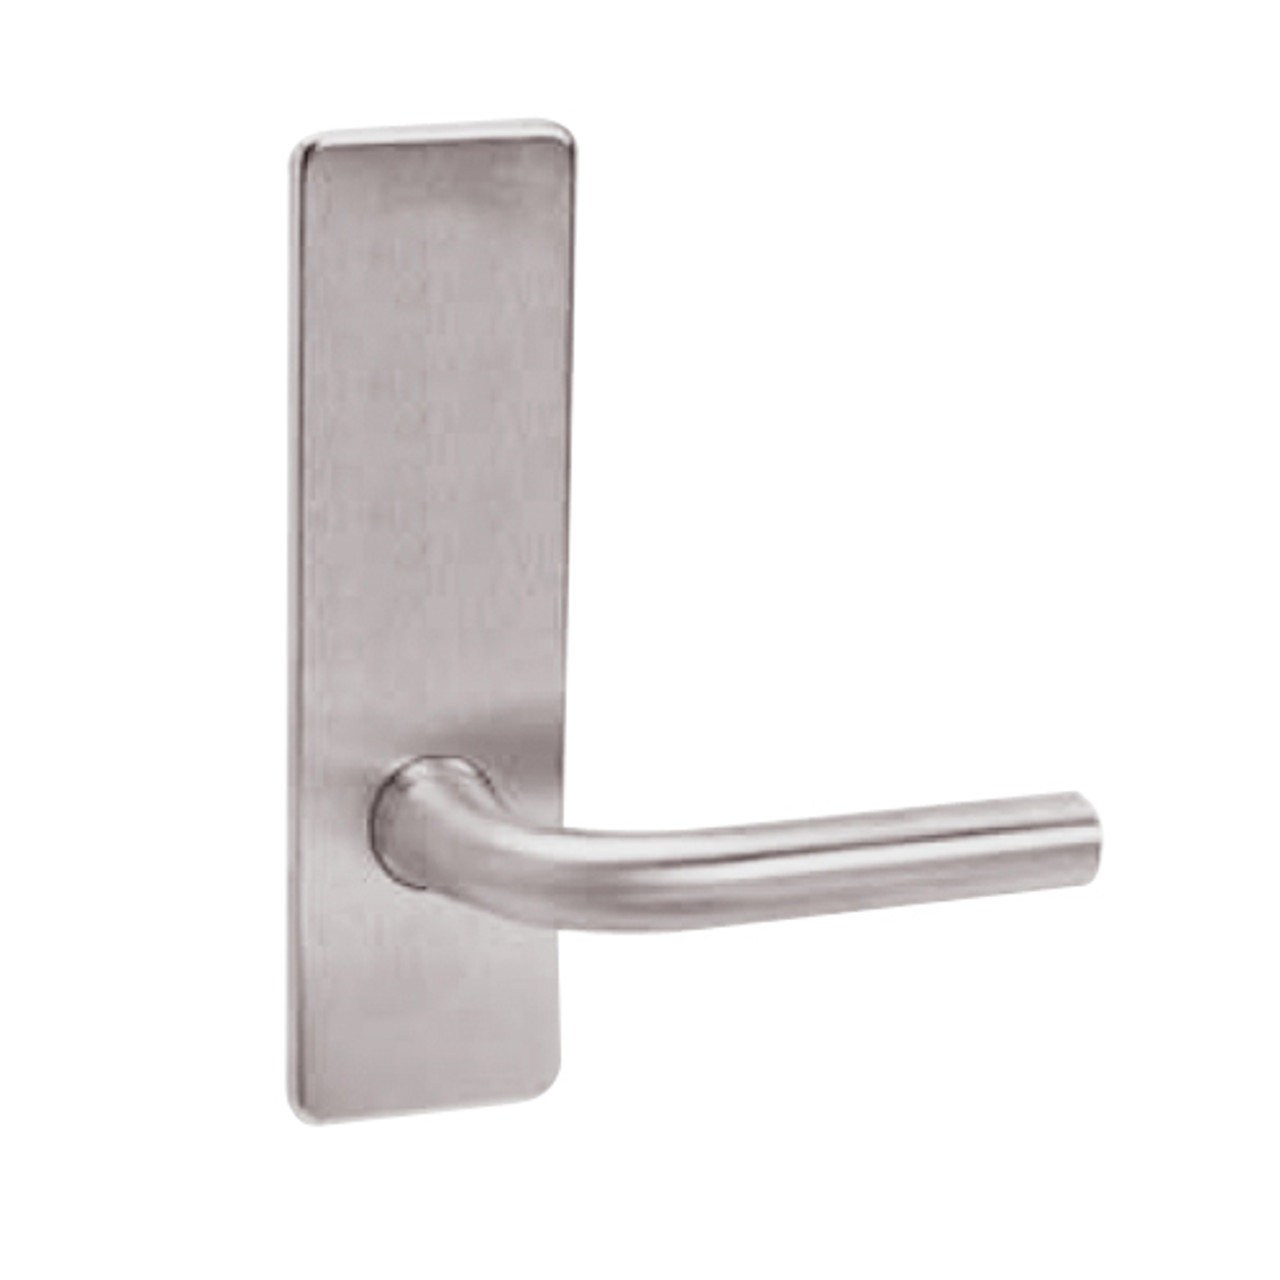 ML2020-RSP-630-M31 Corbin Russwin ML2000 Series Mortise Privacy Locksets with Regis Lever in Satin Stainless